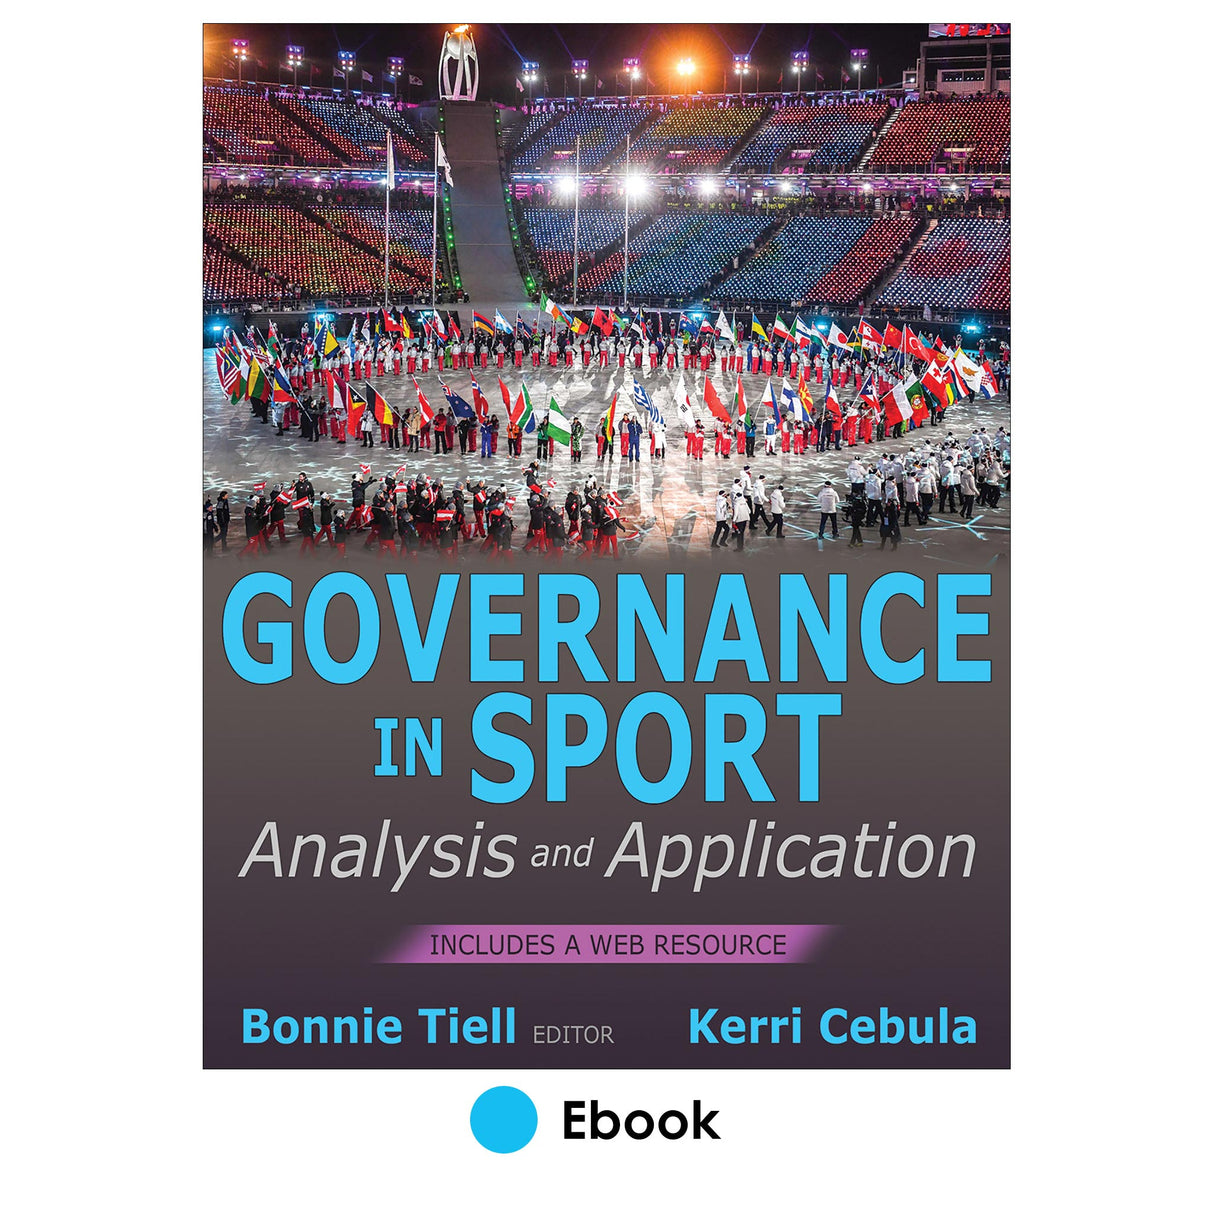 Governance in Sport epub with Web Resource